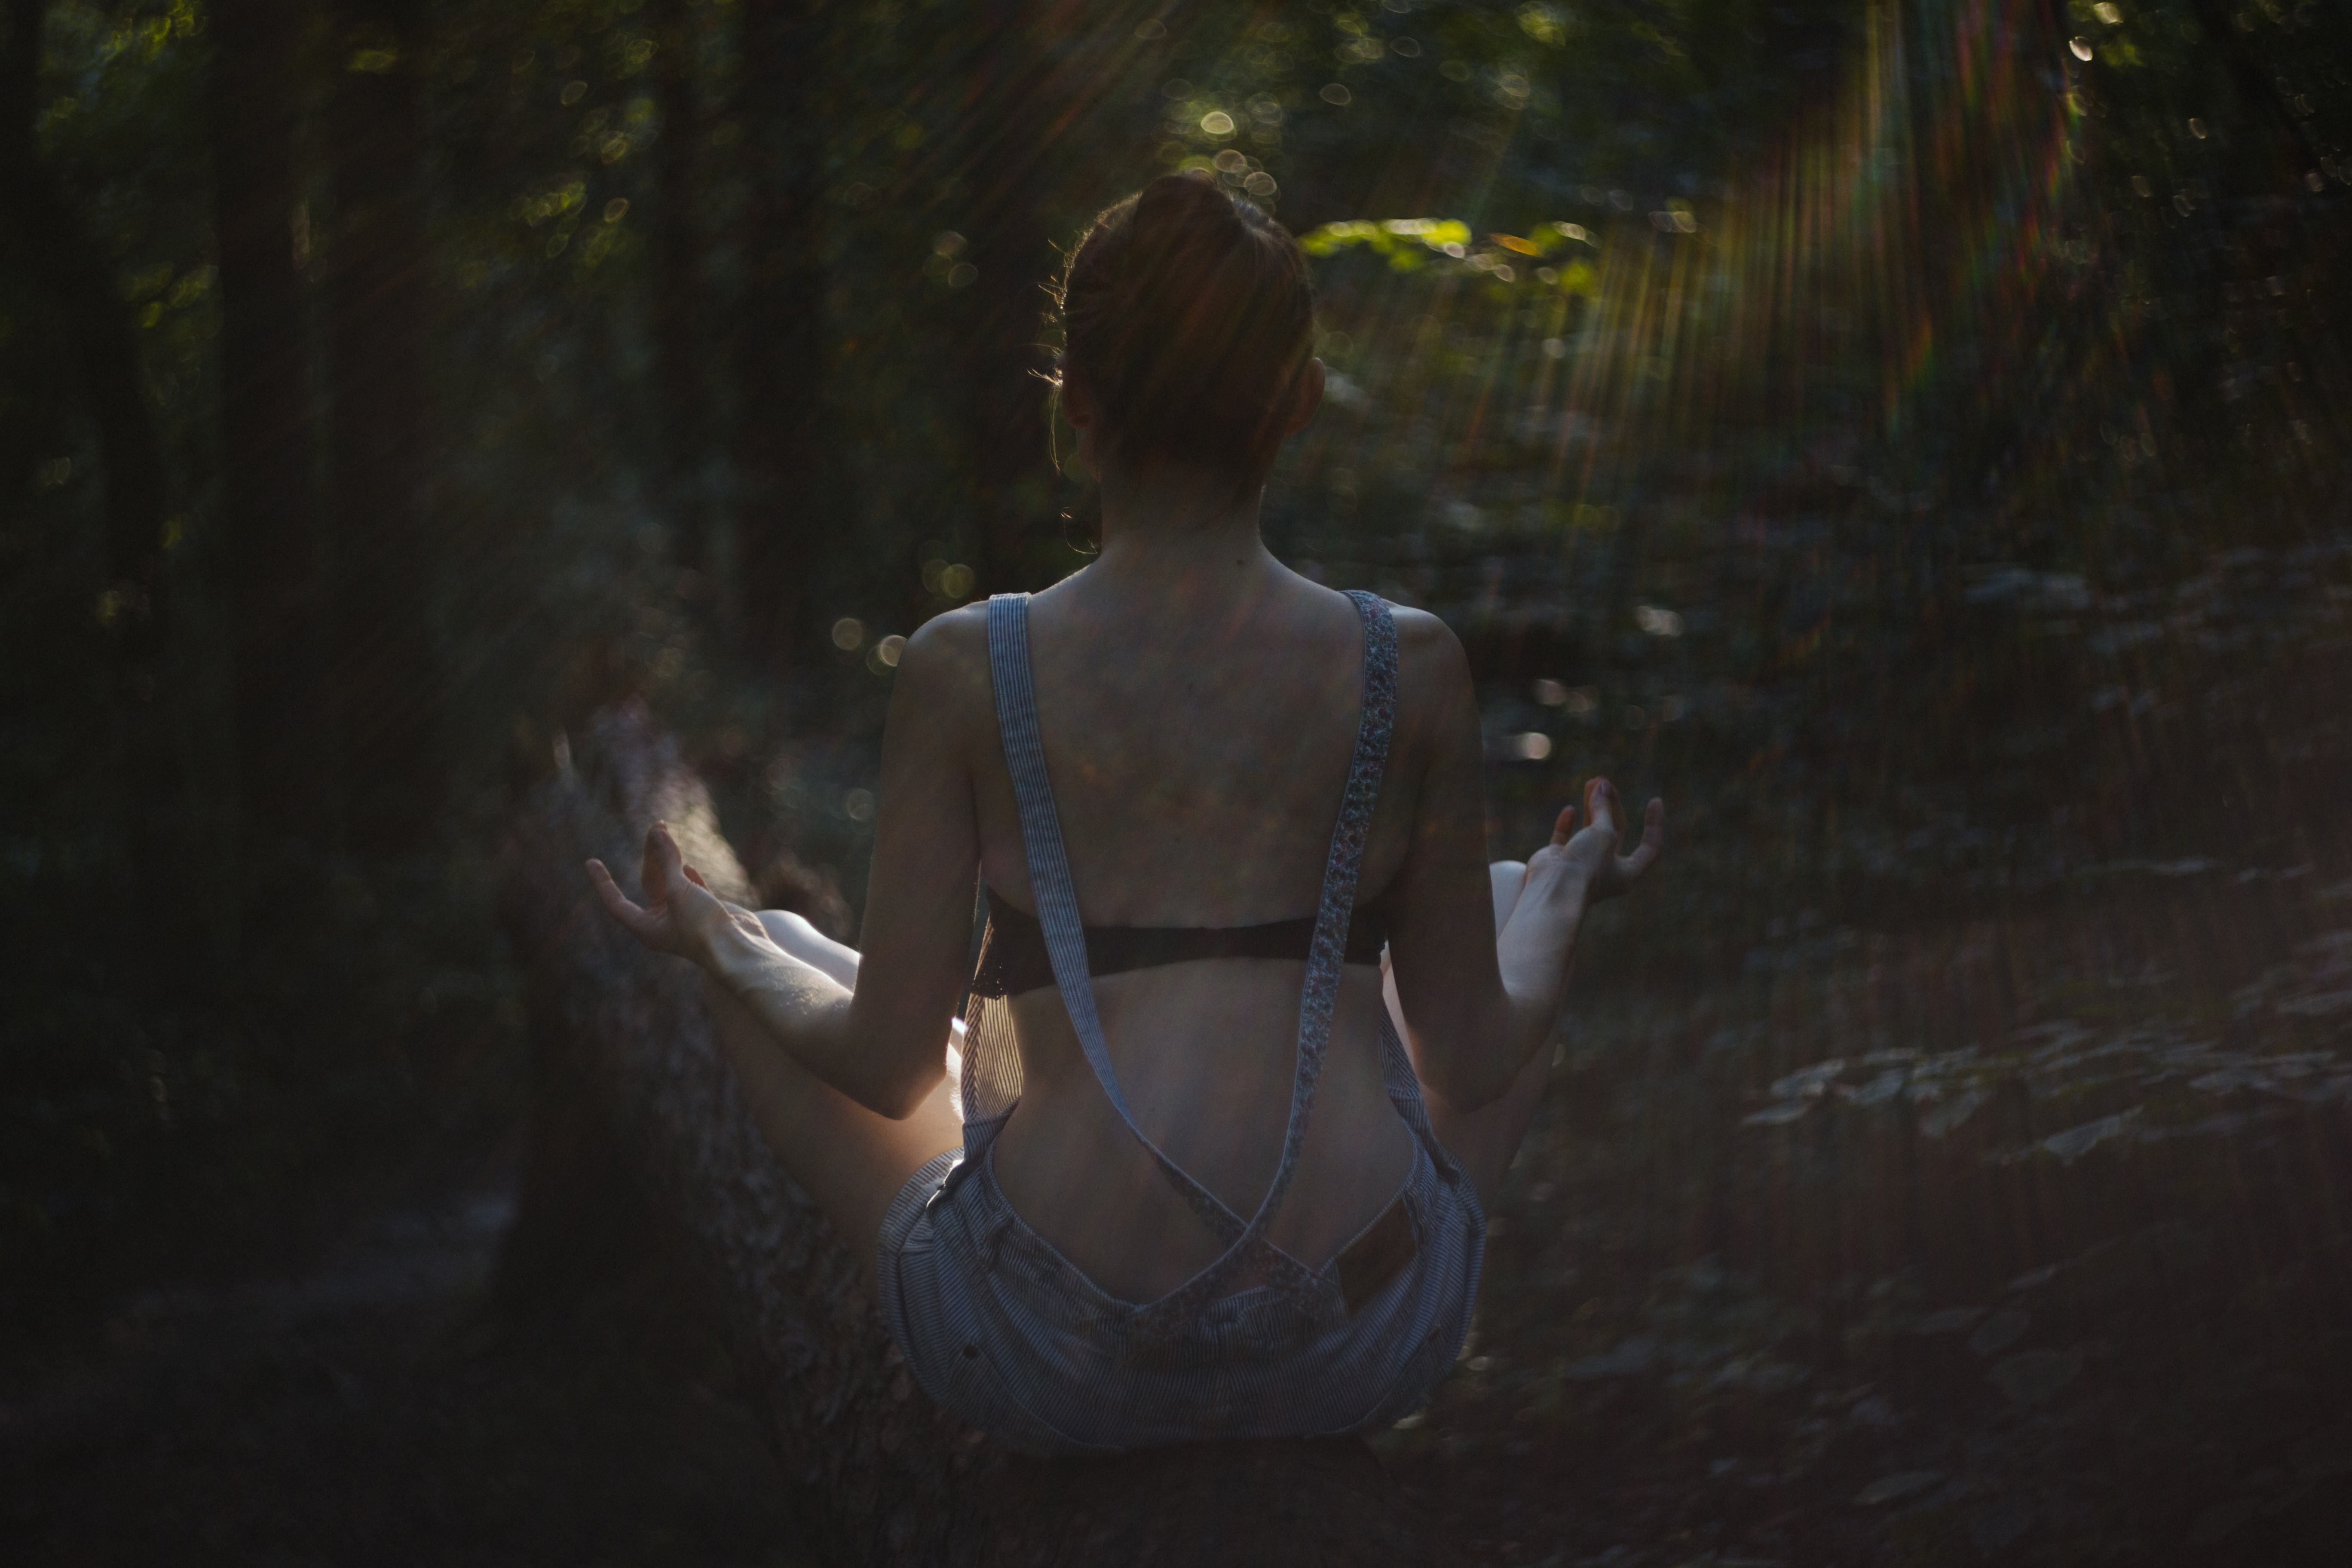 woman meditating in forest